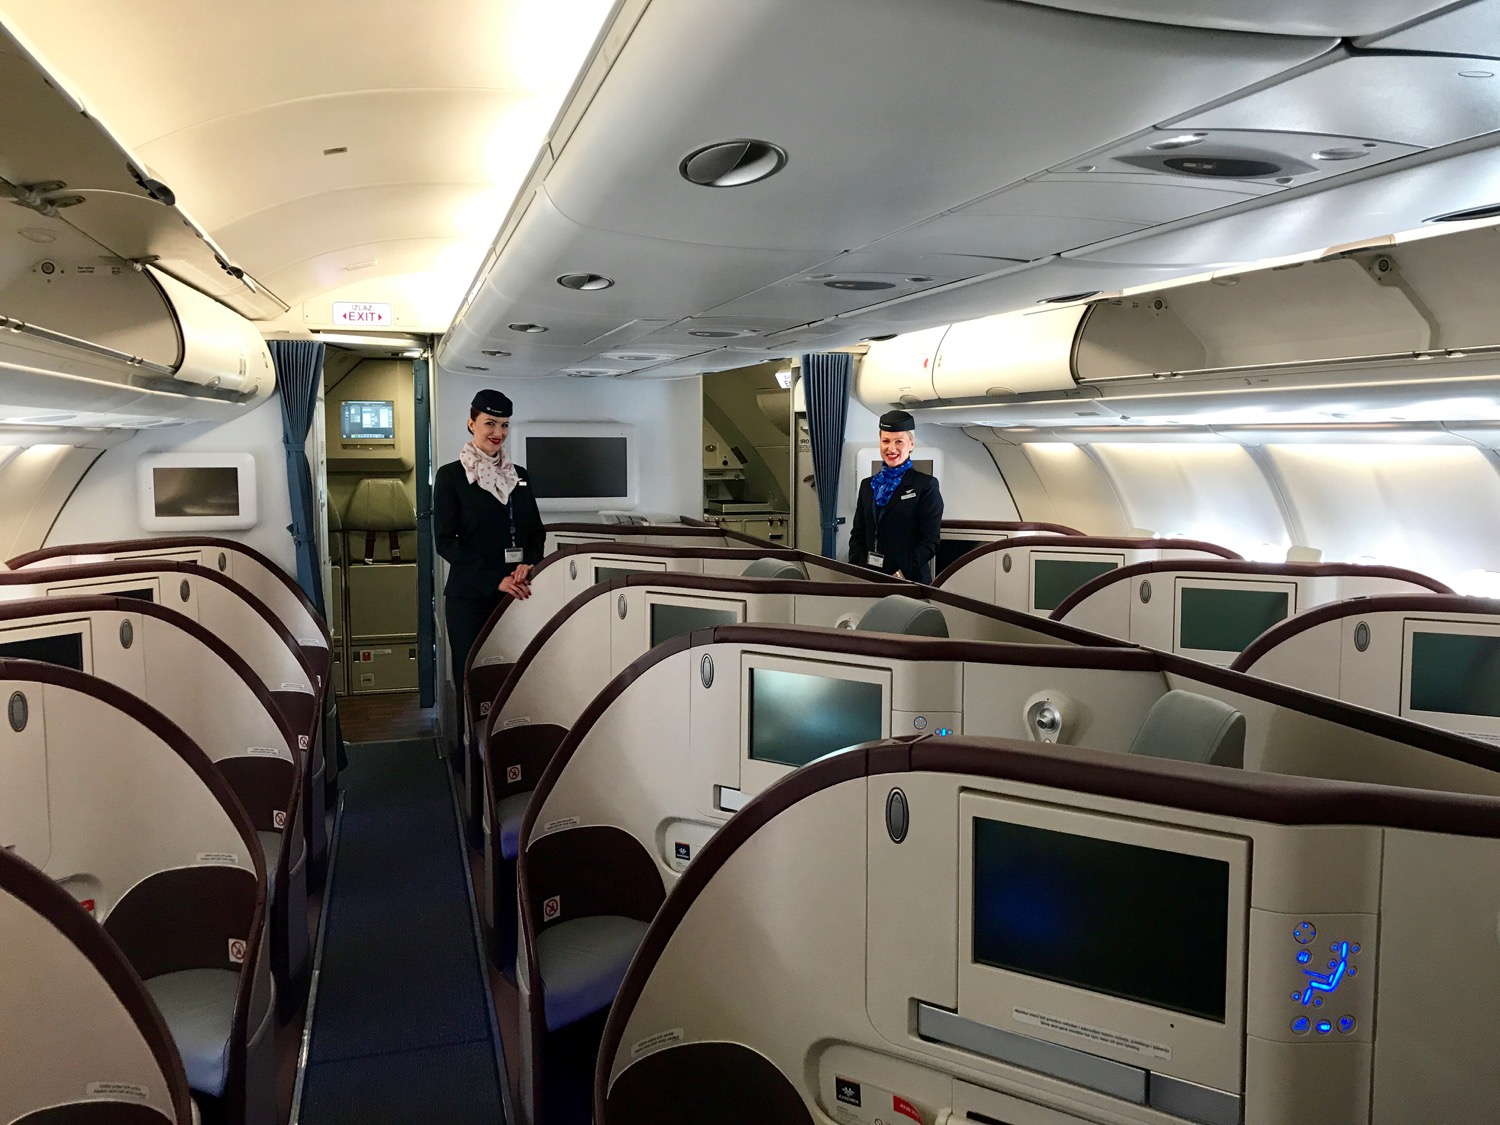 8. Air Serbia Seating and Amenities: What You Can Expect